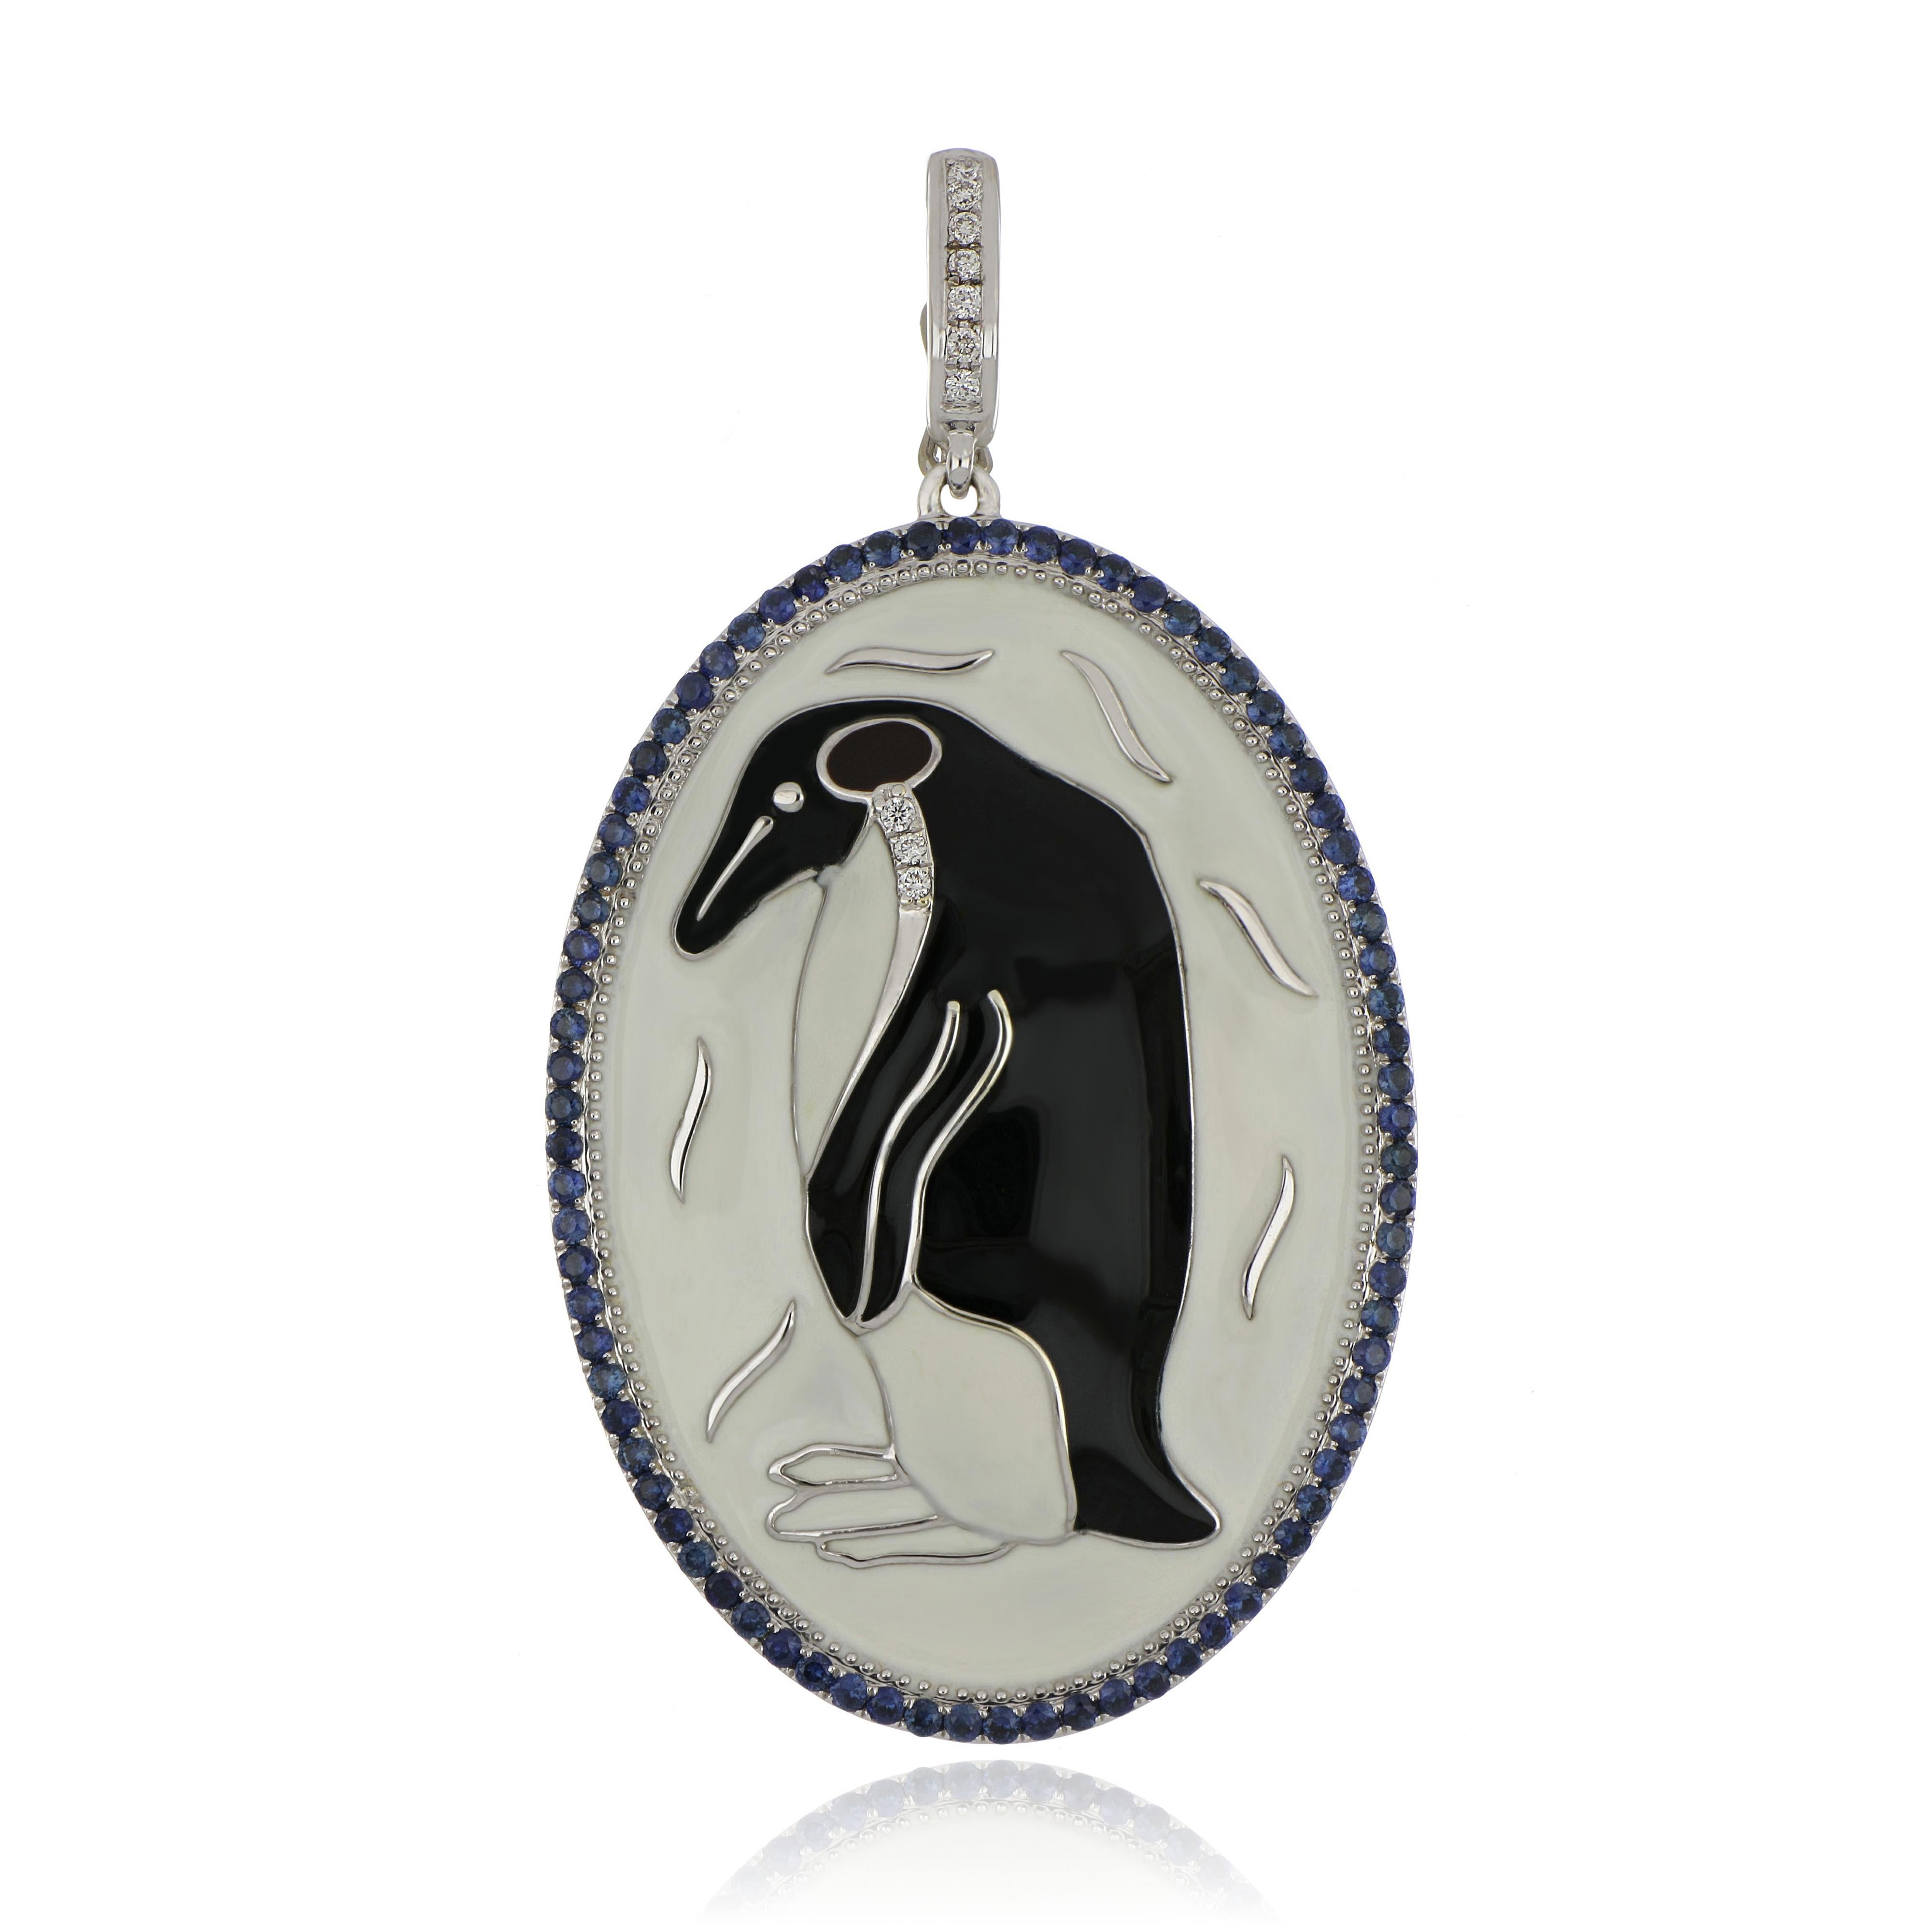 Elegant and exquisite Enamel Cocktail 14 K Pendant, set with 0.56Cts. Blue Sapphire Rounds, accented with Diamonds, weighing approx. 0.1 Cts Beautifully Hand crafted in 14 Karat Yellow Gold.

Stone Size:

Blue Sapphire: 1.0x1.0 mm

Gemstone Carat